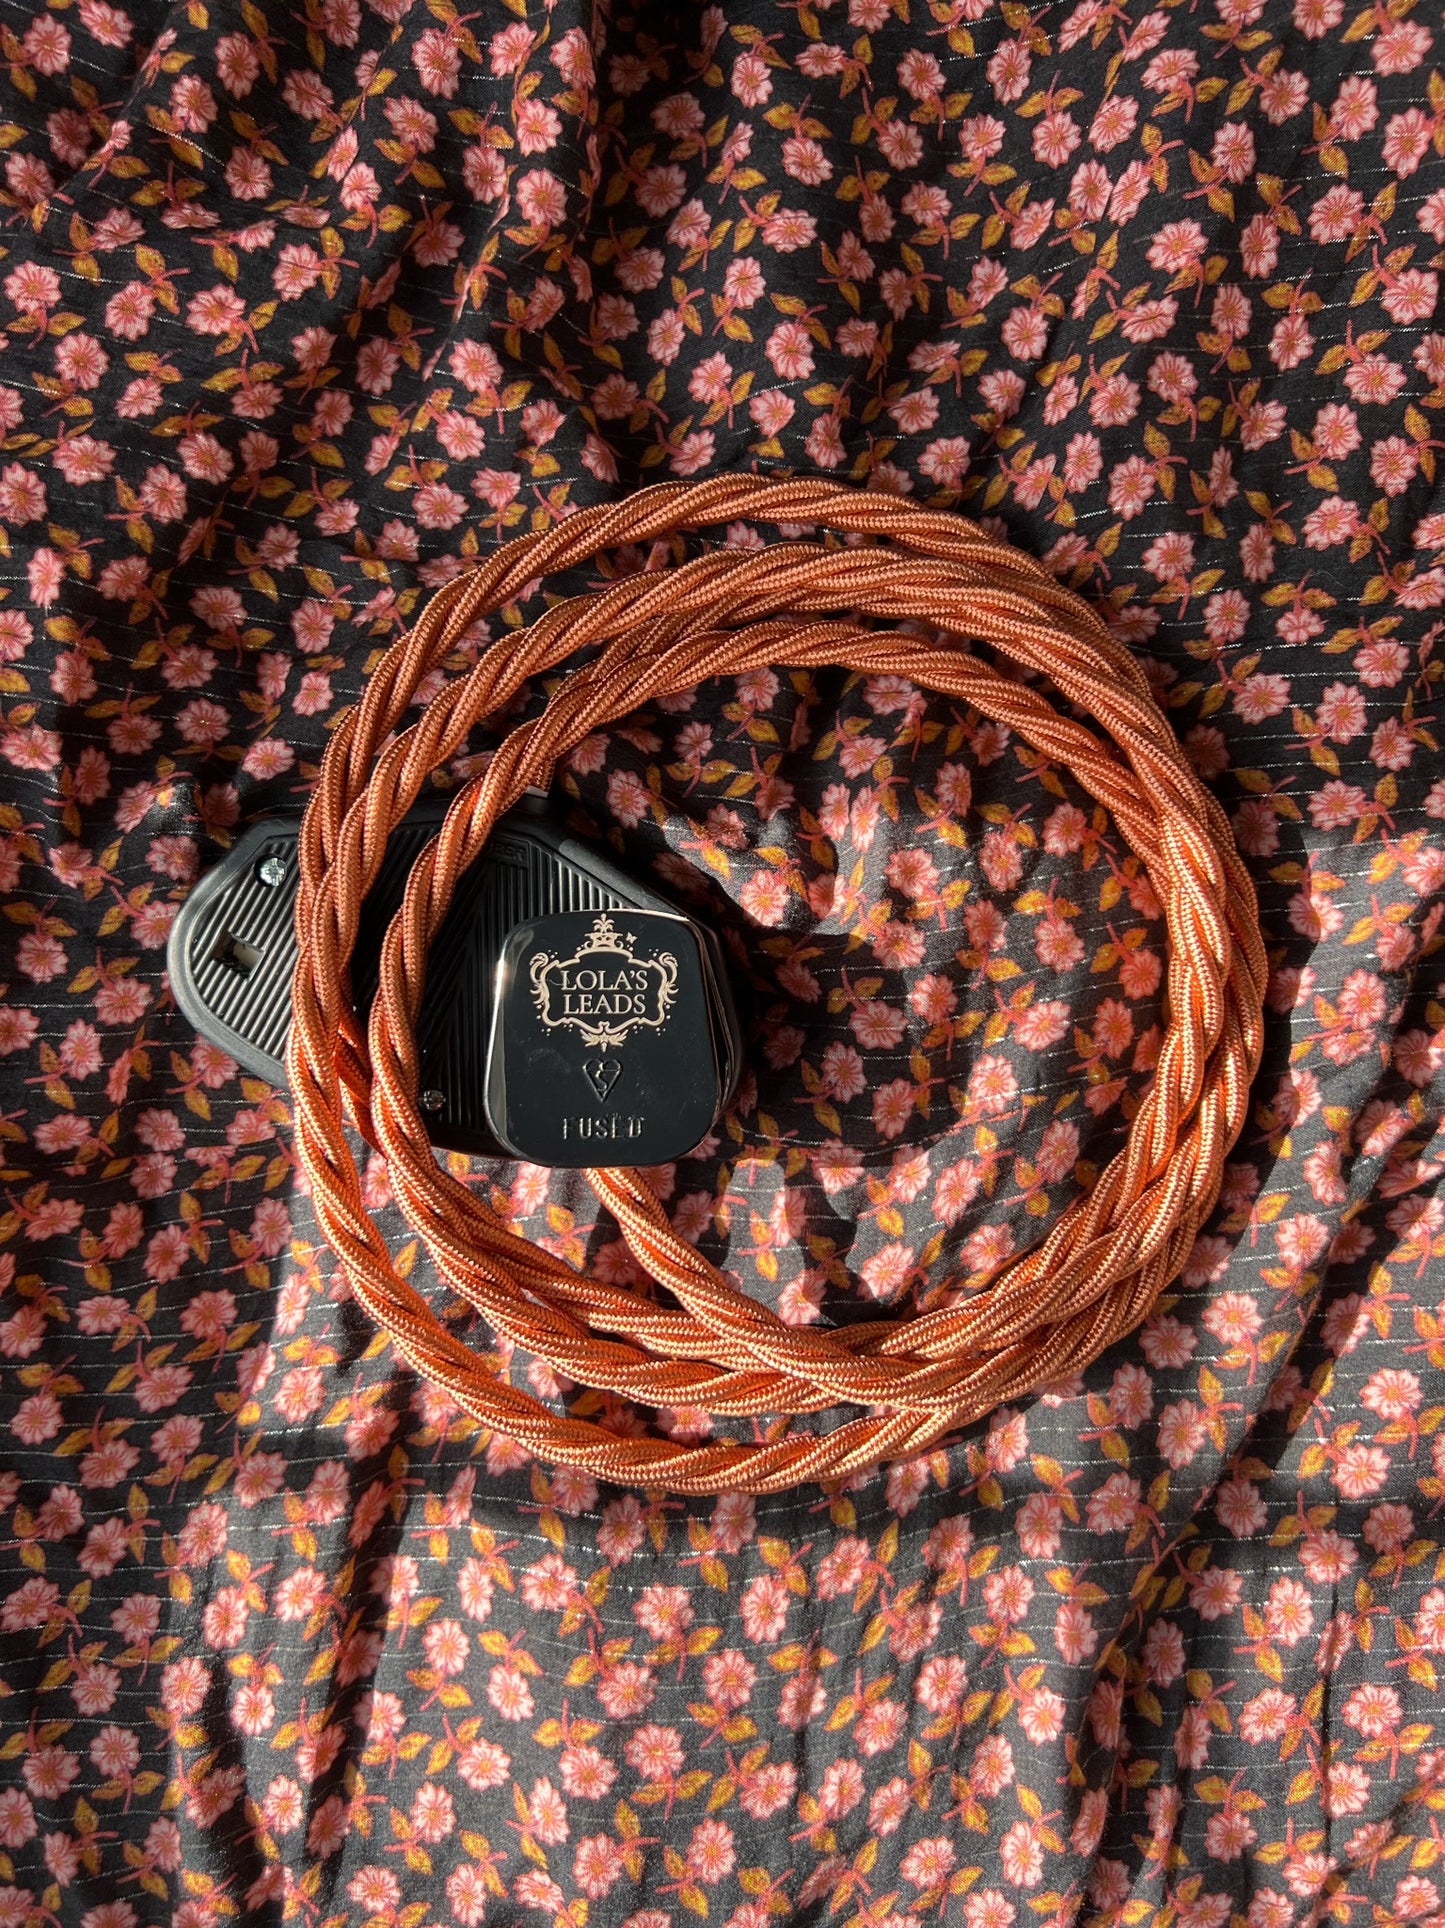 Copper - Lola's Leads Fabric Extension Cable